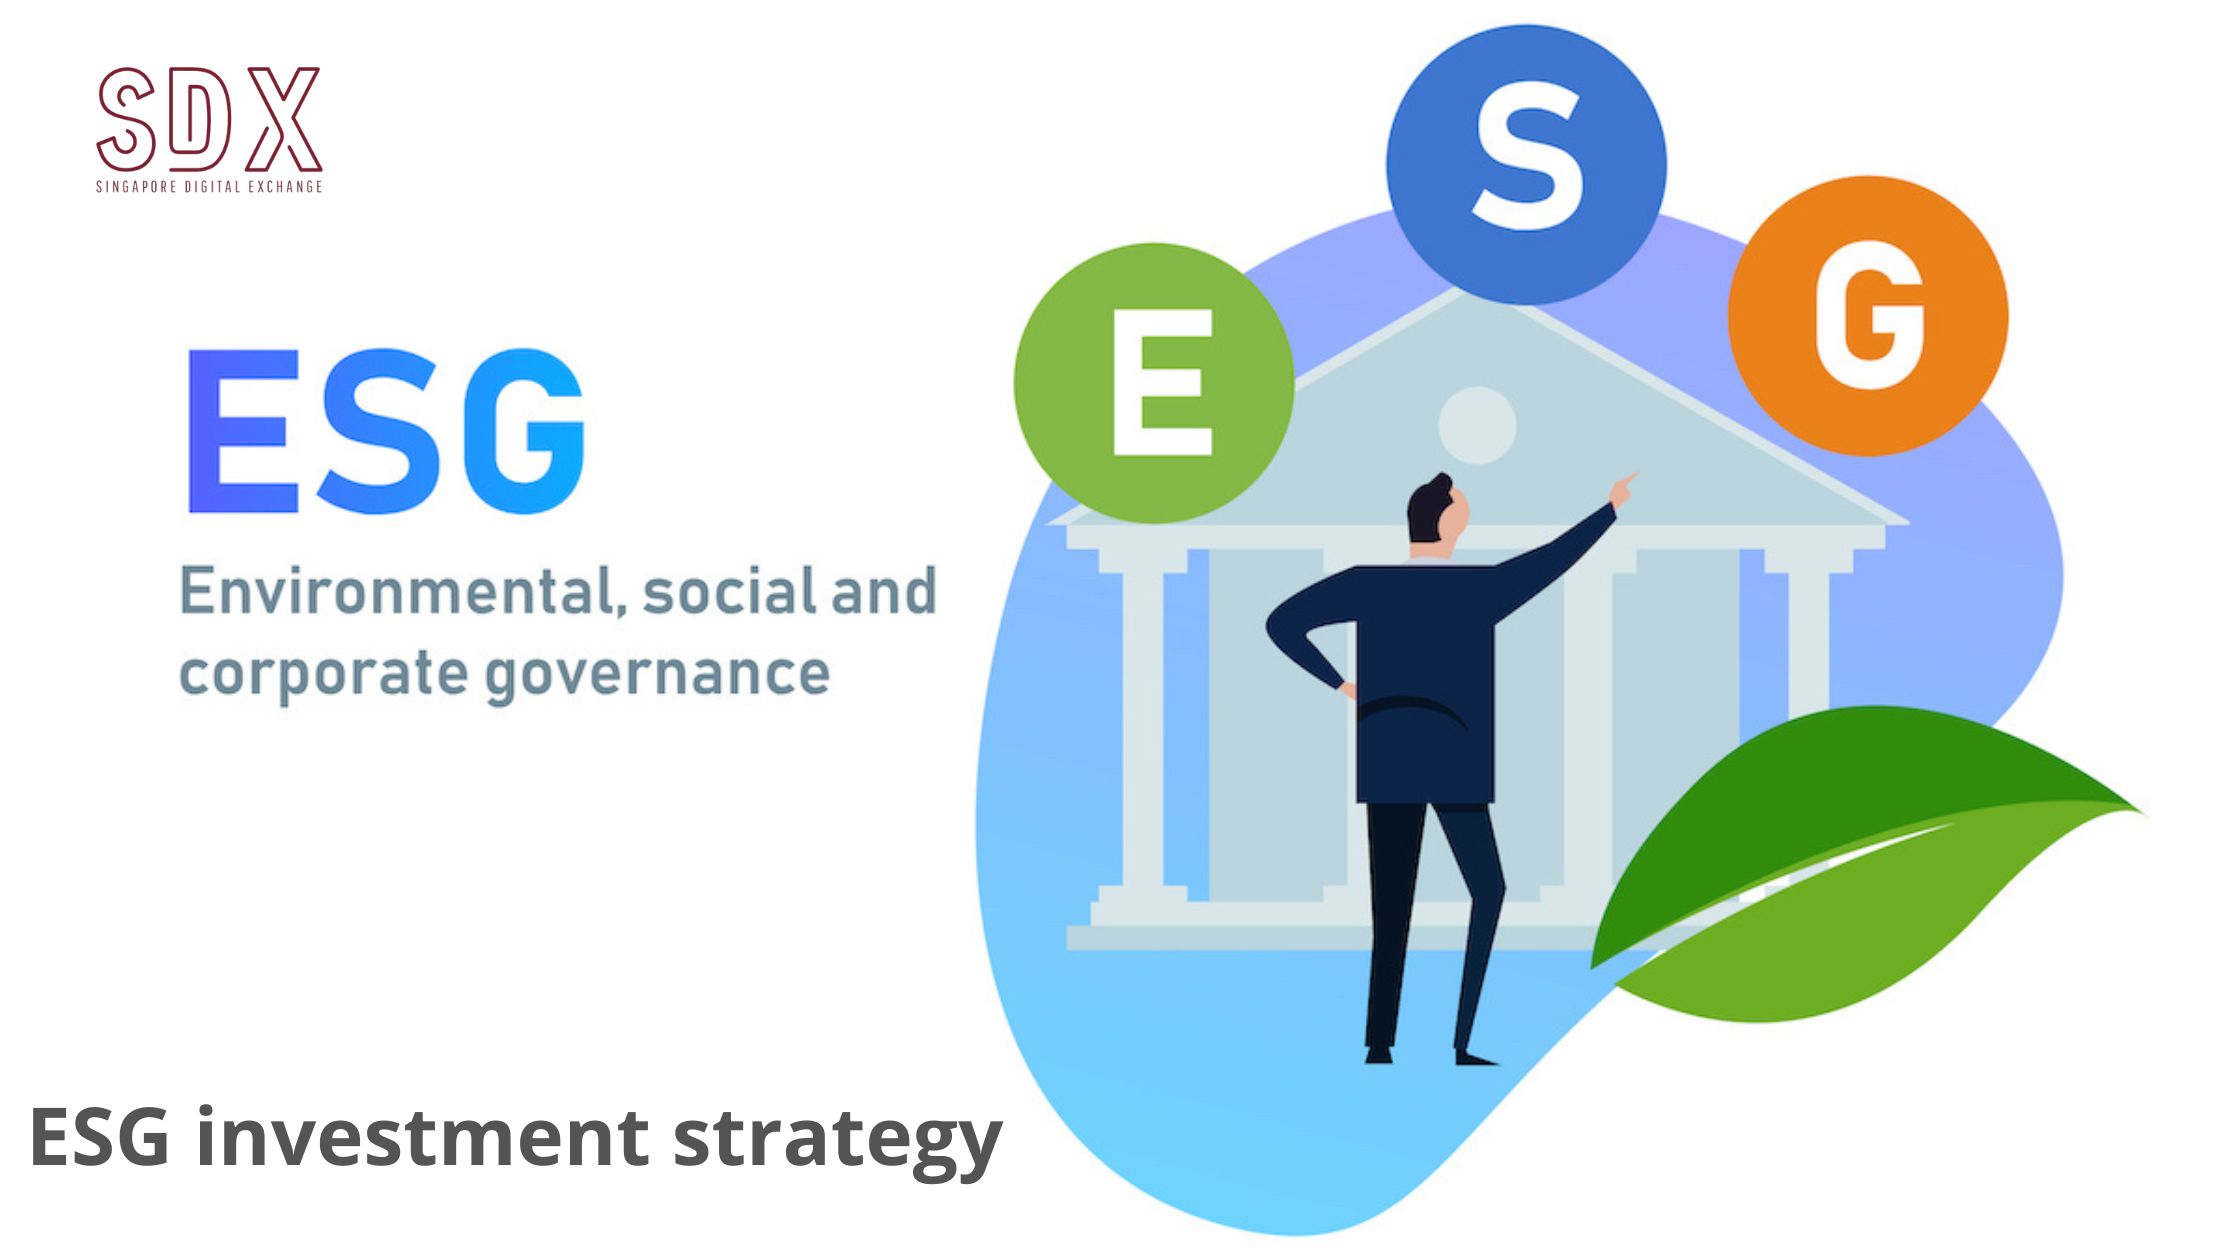 ESG investment strategy